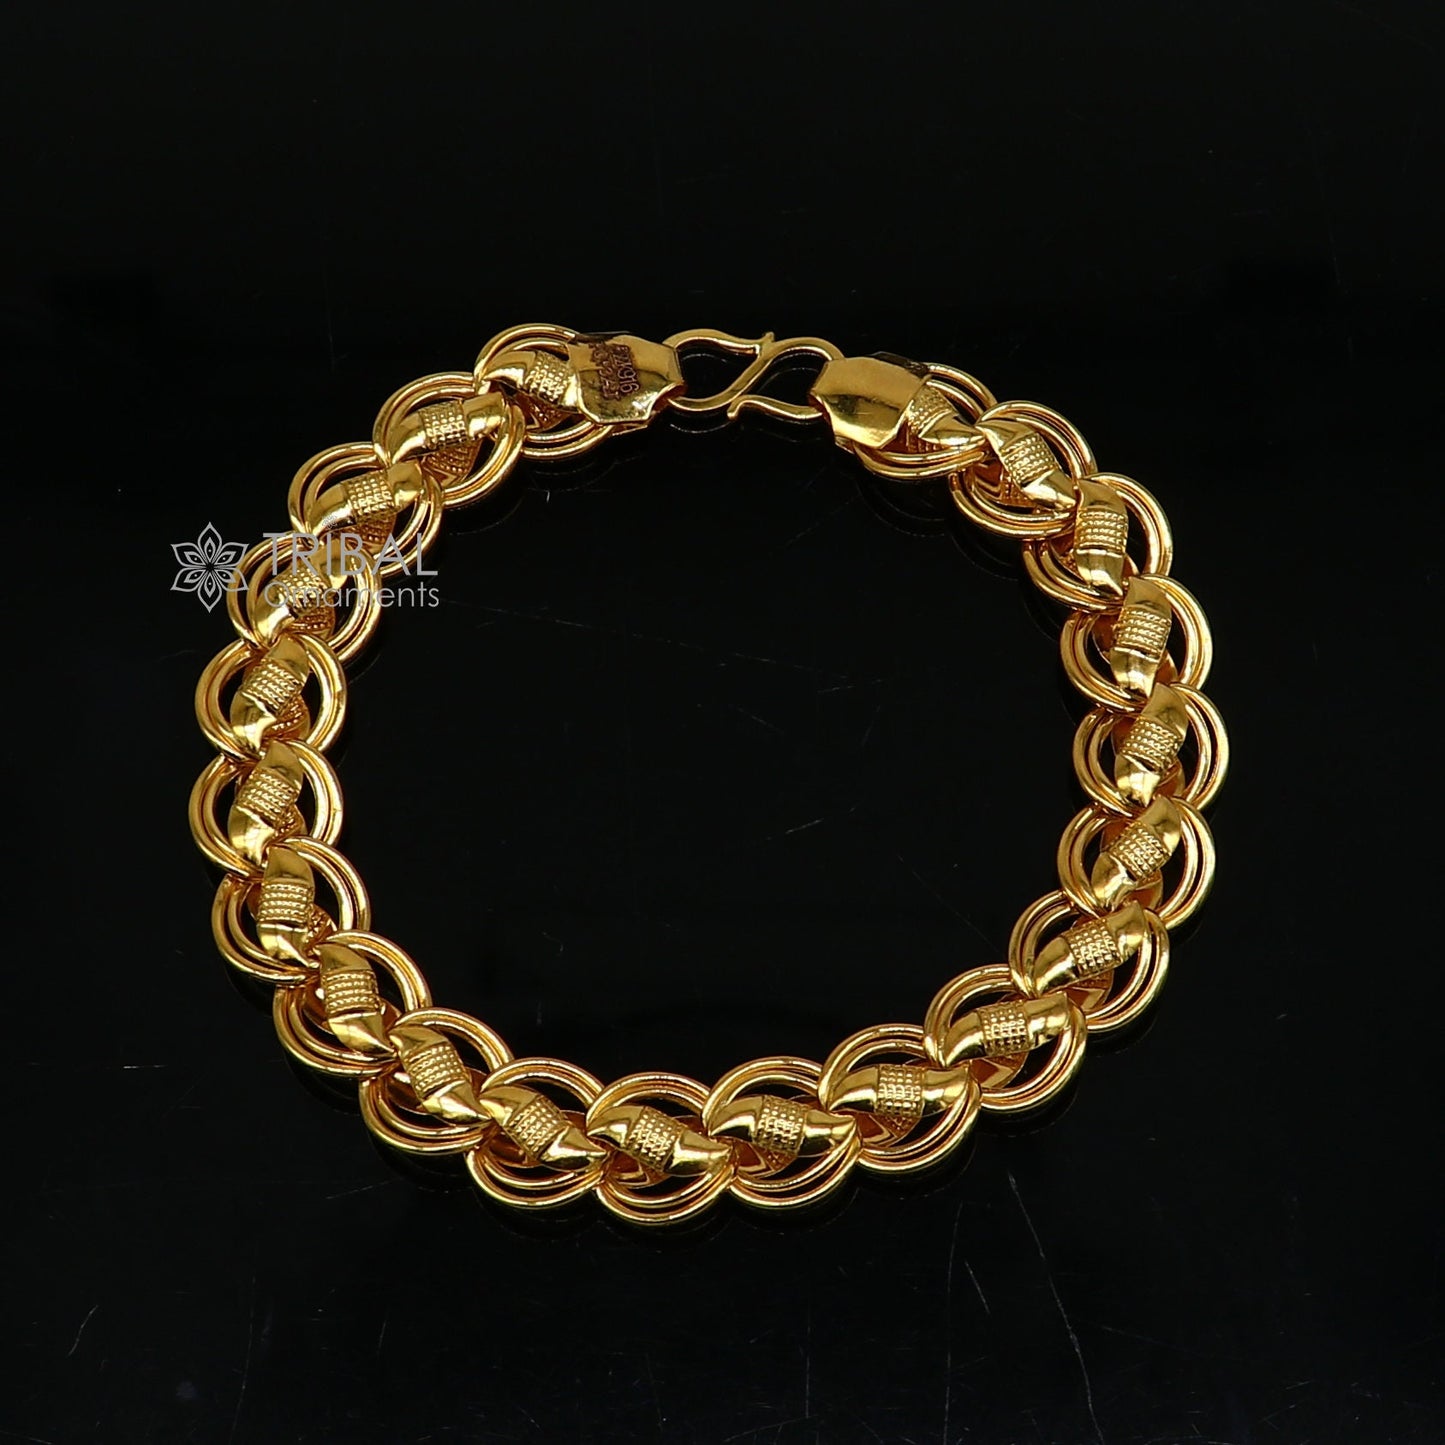 Exclusive trendy lotus design handmade 22kt  yellow gold All size bracelet best men's wedding gifting jewelry from india gbr75 - TRIBAL ORNAMENTS